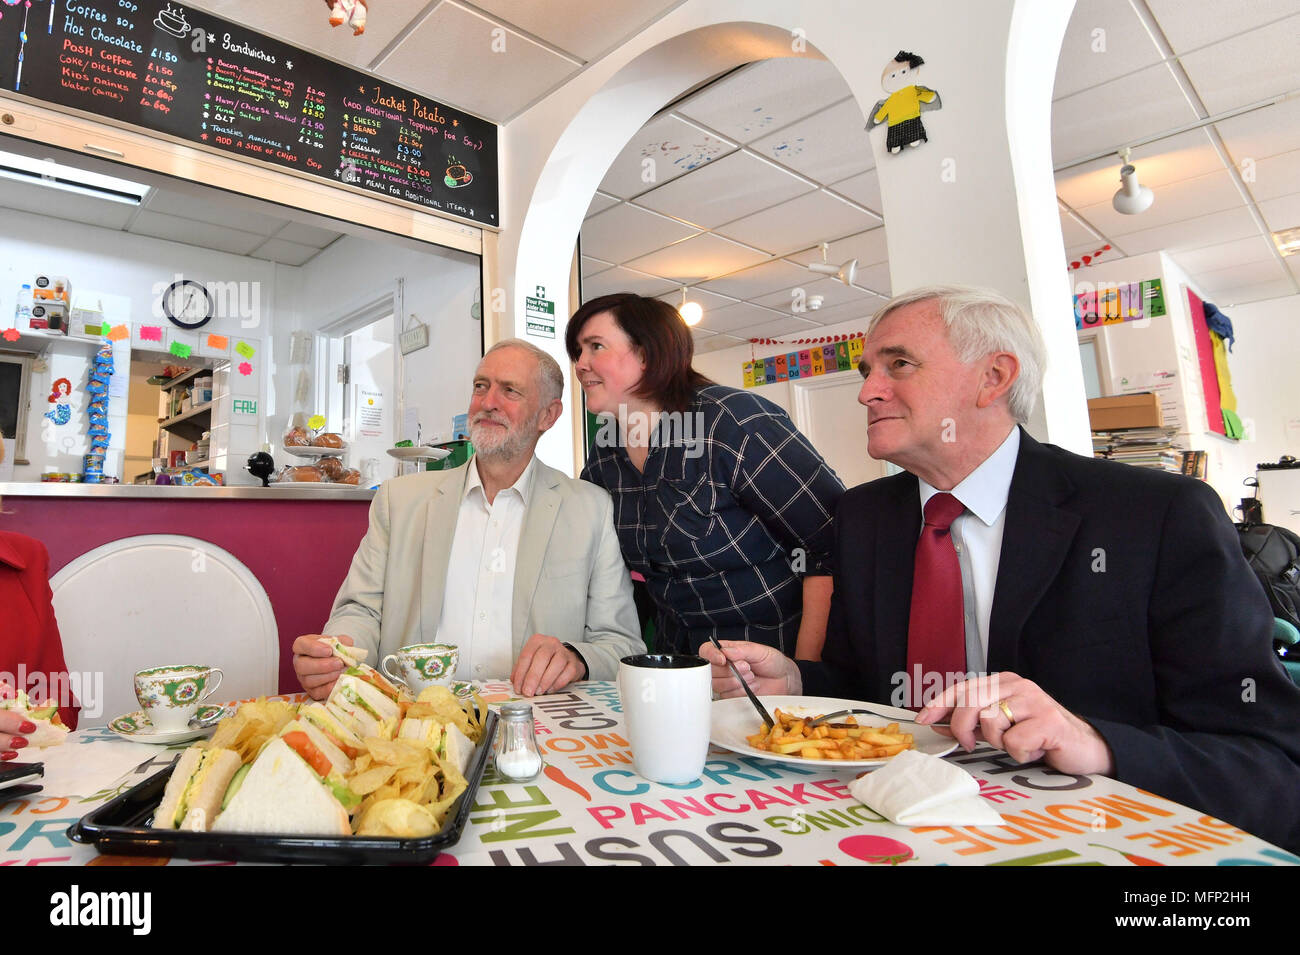 Labour leader Jeremy Corbyn and shadow chancellor John McDonnell having a bit to eat while canvassing in the Com.Cafe. West Drayton, London ahead of the local elections. Stock Photo